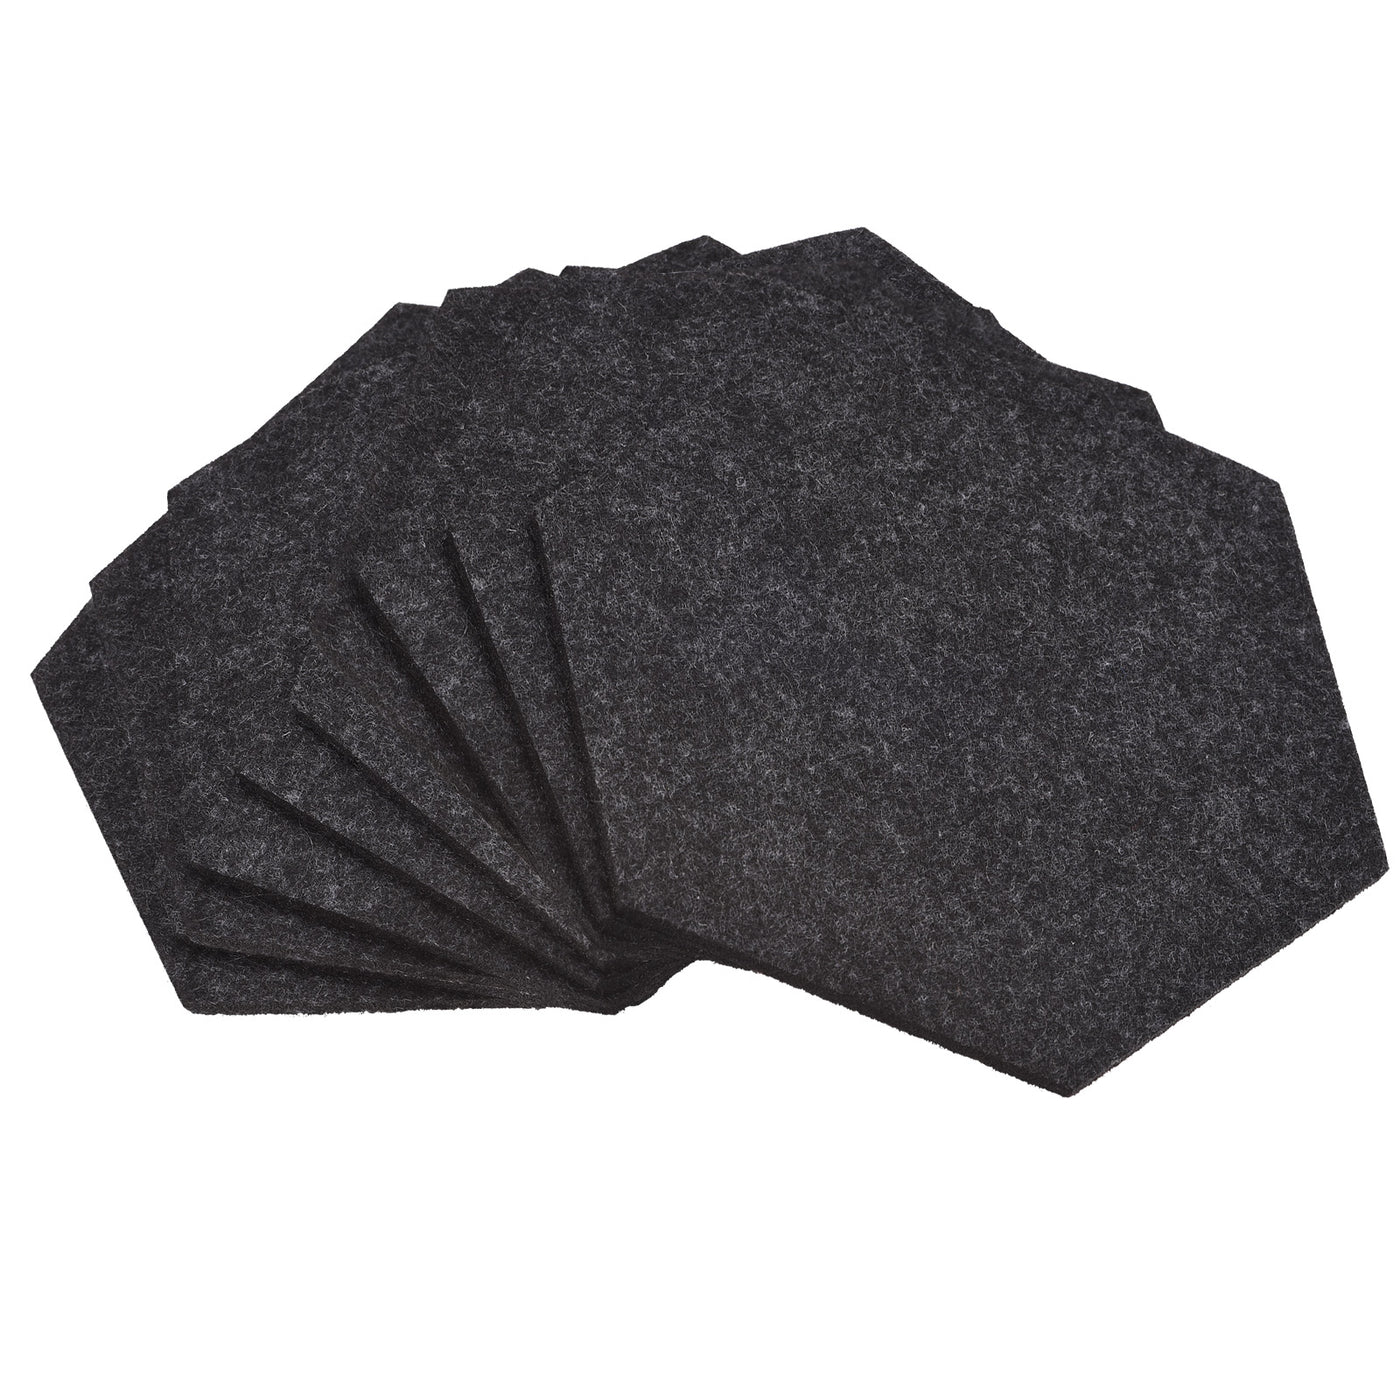 uxcell Uxcell Felt Coasters 9pcs Absorbent Pad Coaster for Drink Cup Pot Bowl Vase Gray